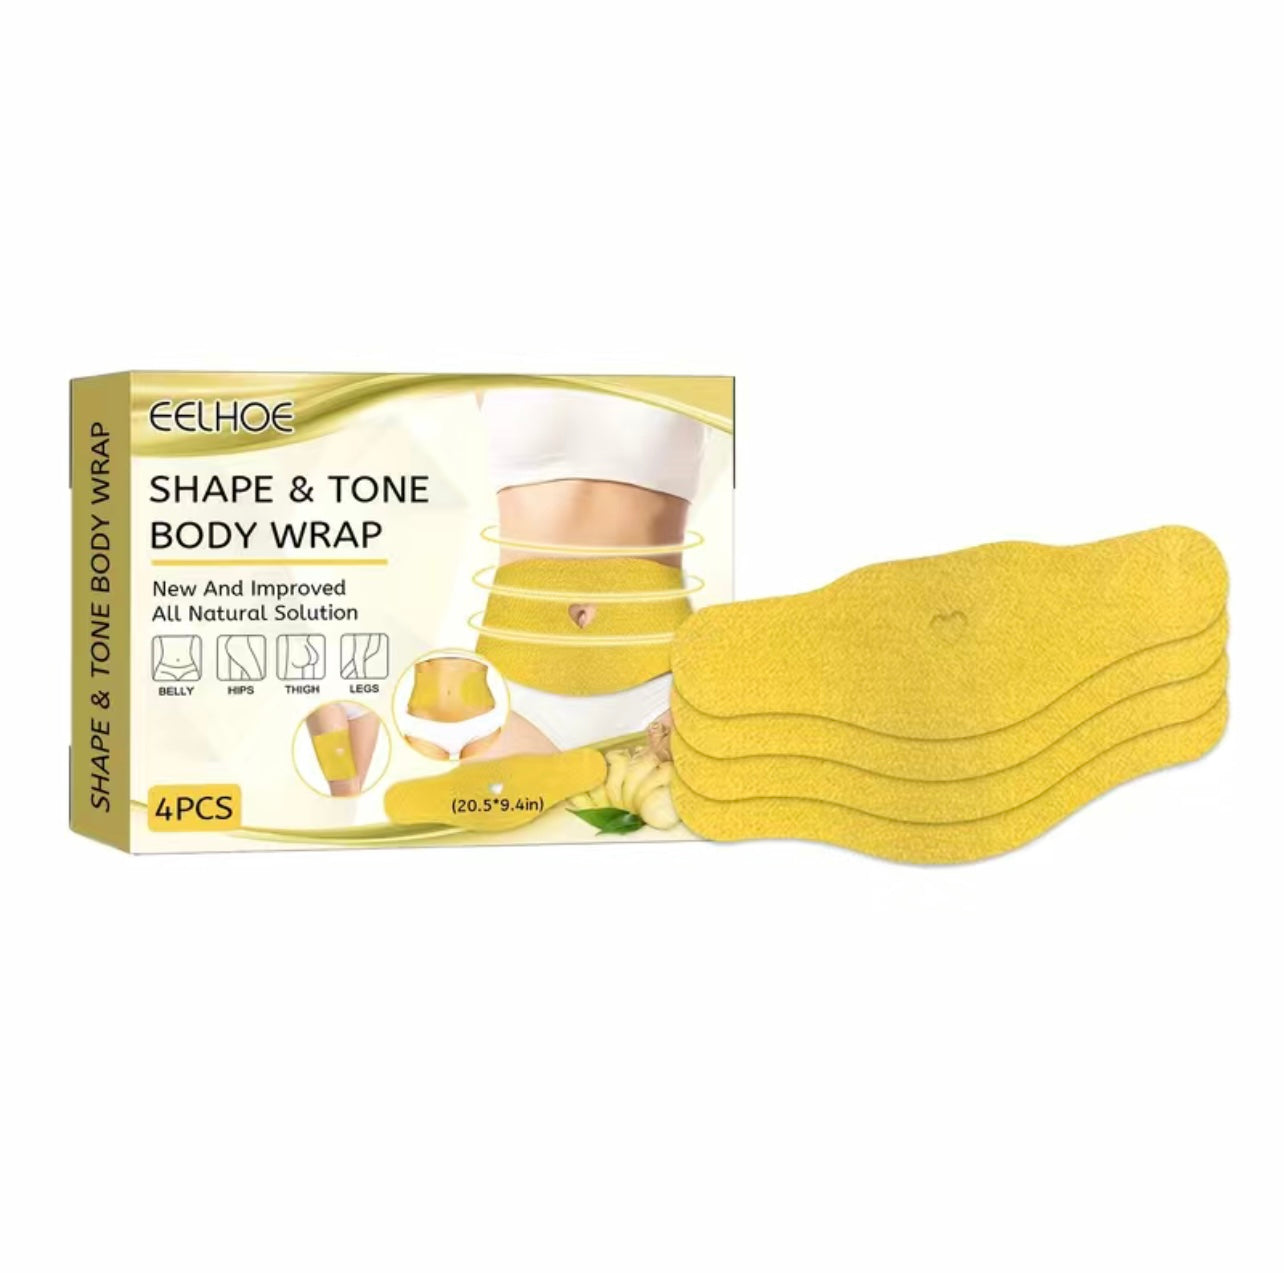 4 piece body slimming and body contouring wraps. Body wraps for weight loss. Detoxing body wrap. Detox body slimming wrap. At home body slimming, TikTok vital products, TikTok made me buy it, best of TikTok, salon products at home, salon quality products, body slimming, body sculpting, body contouring, body wraps, home use salon products, weight loss, best diet supplements